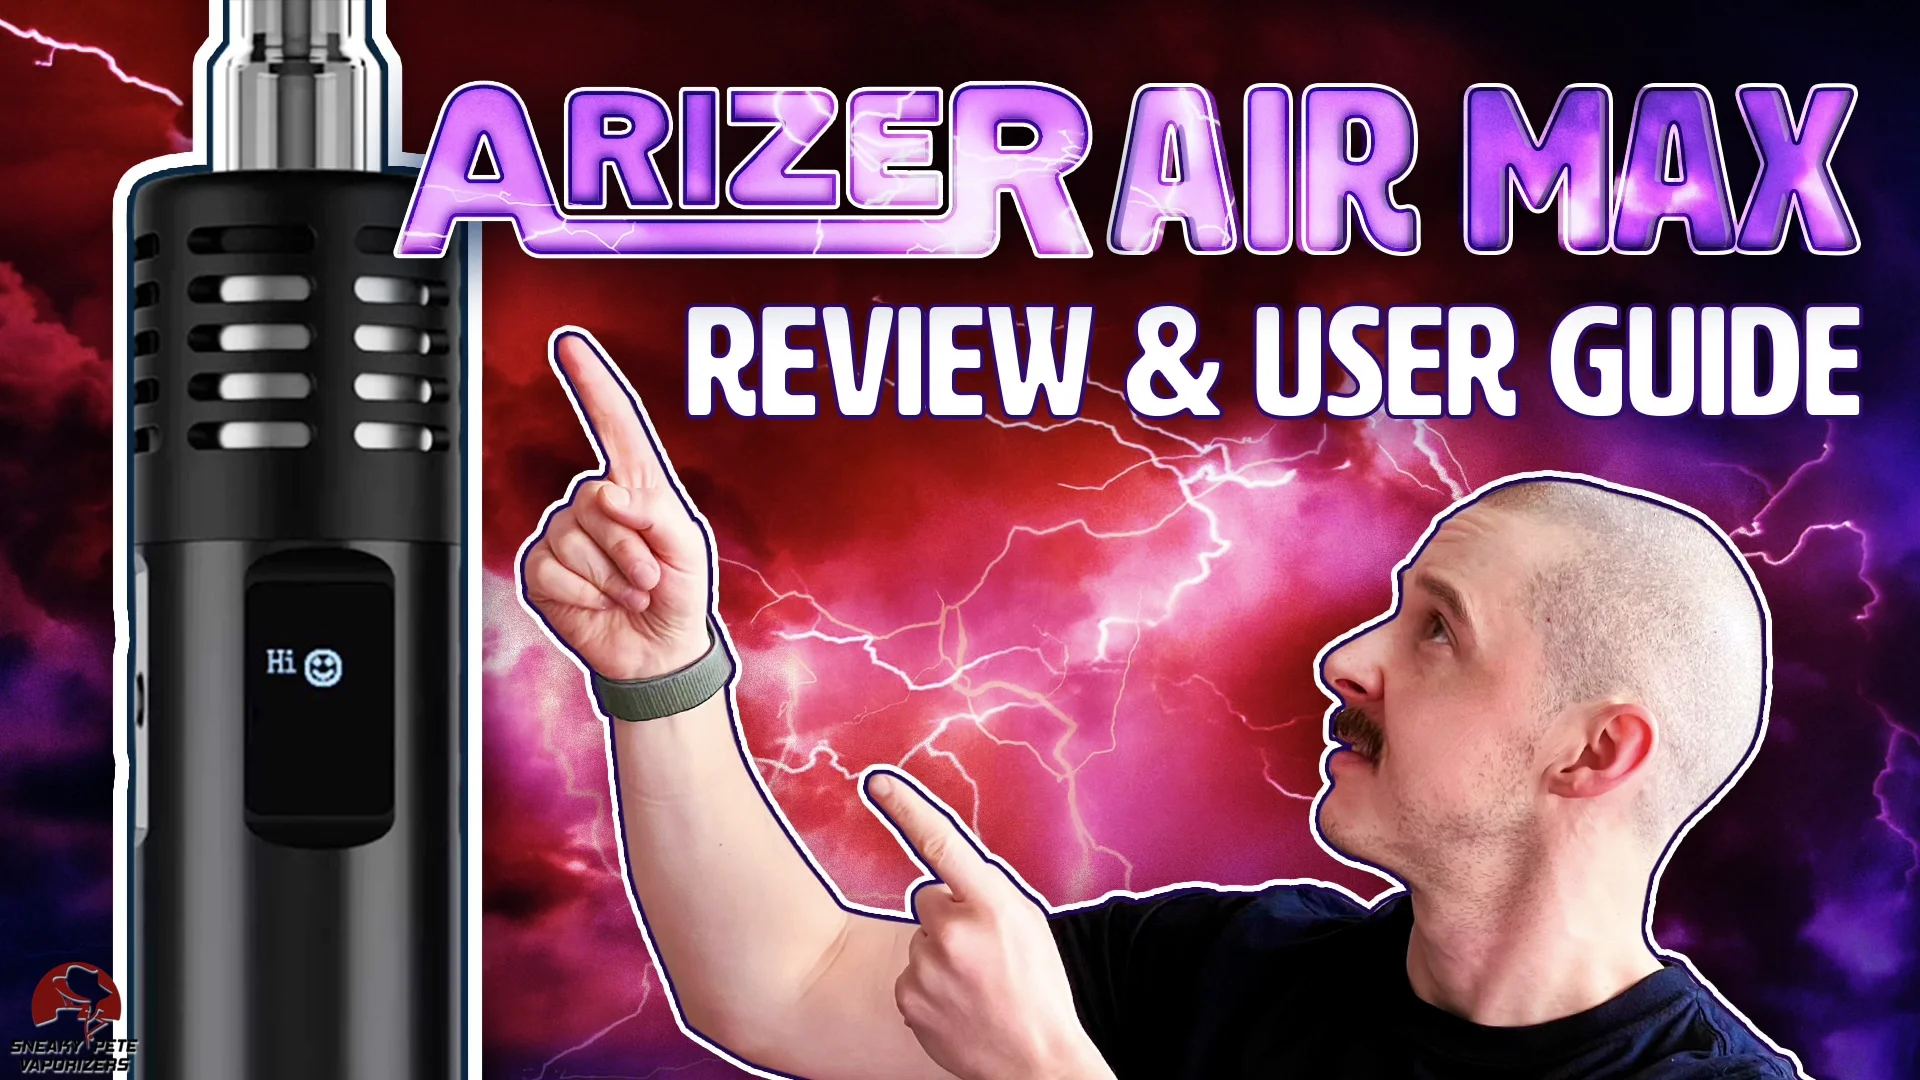 Arizer Air MAX Vaporizer Review, A Solid Update & Some New Tricks